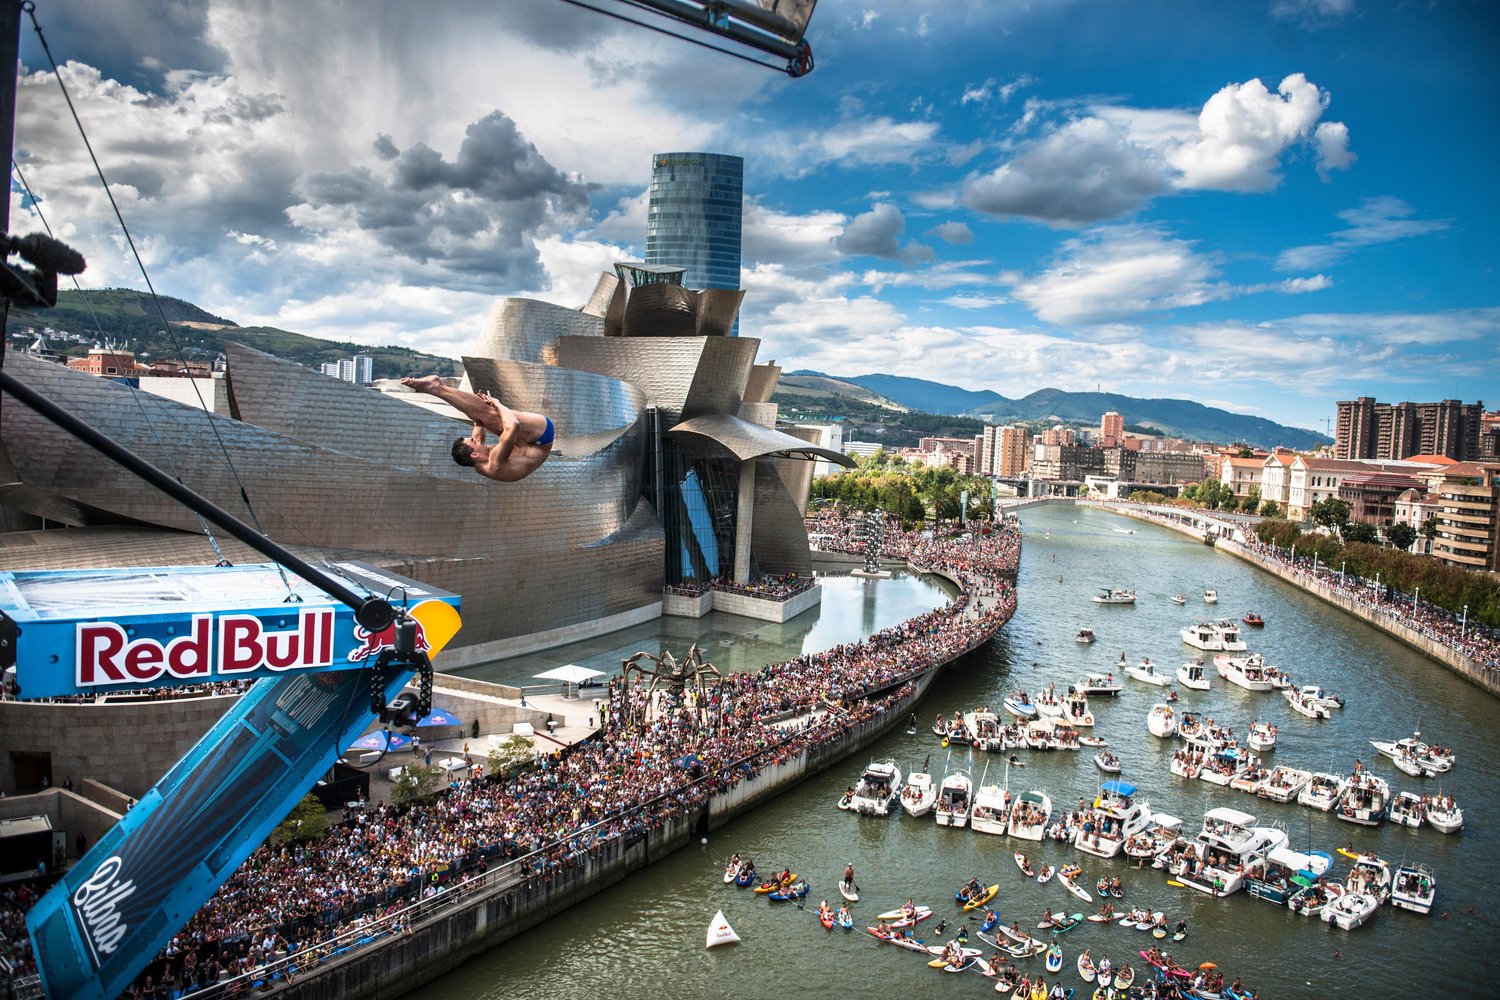 RED BULL CLIFF DIVING